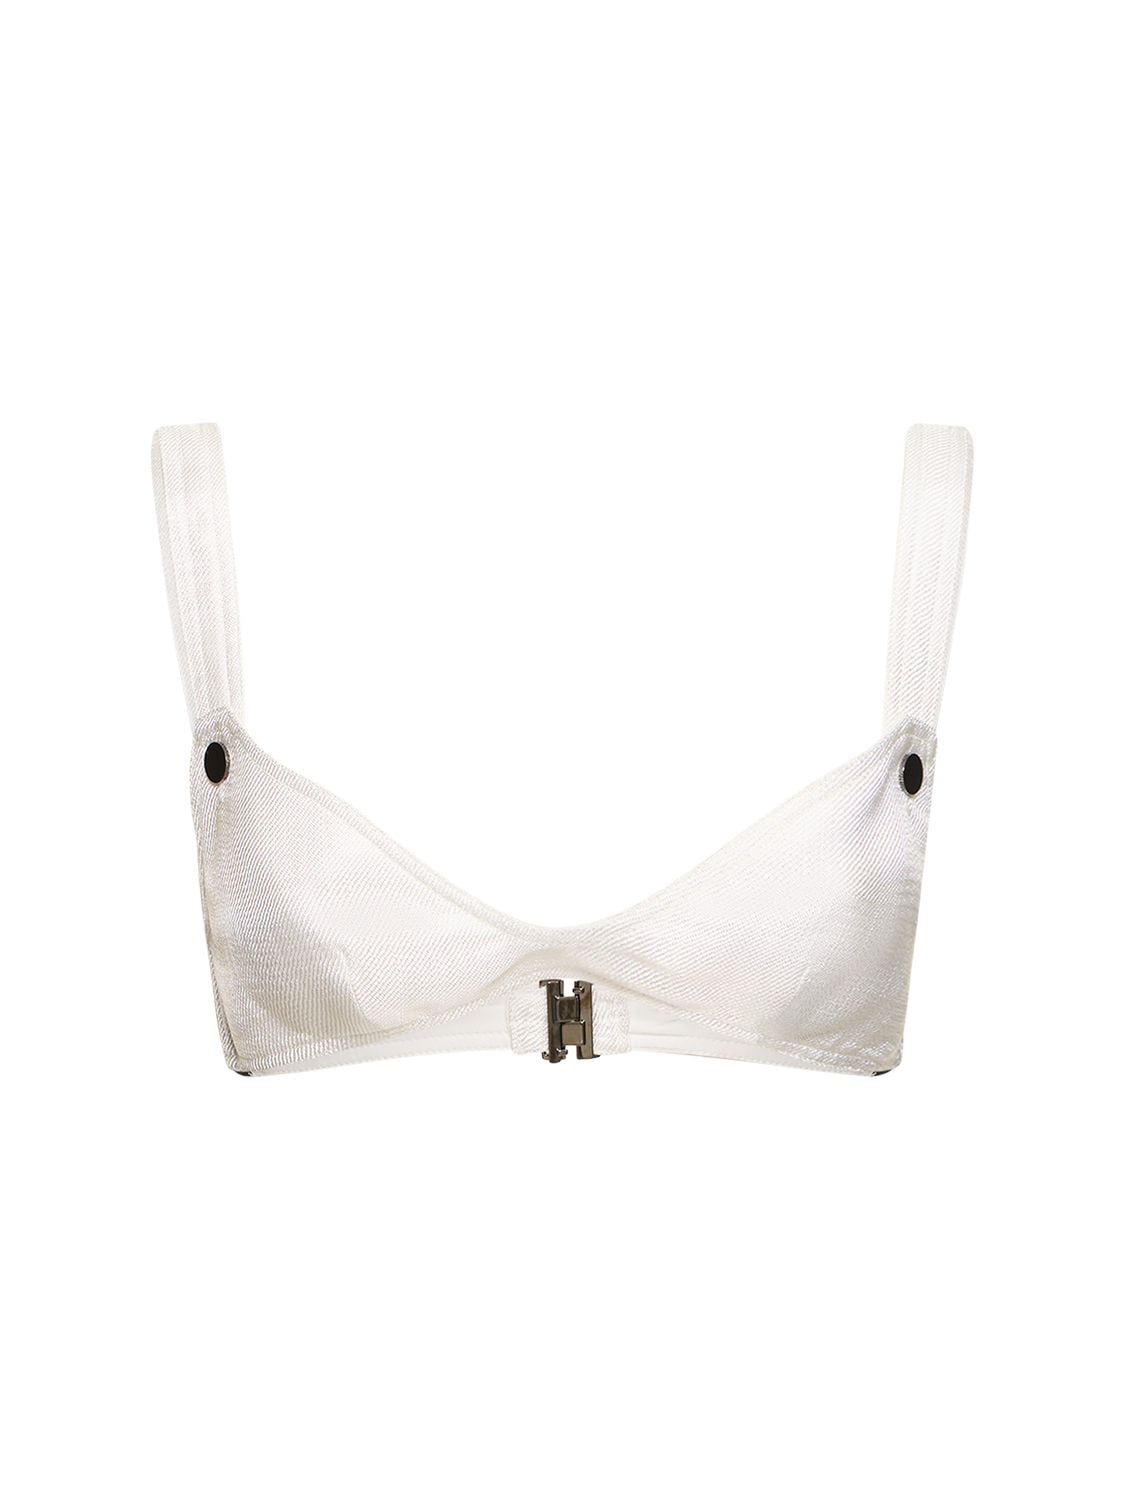 Tom Ford Lvr Exclusive Satin Bra Top In White